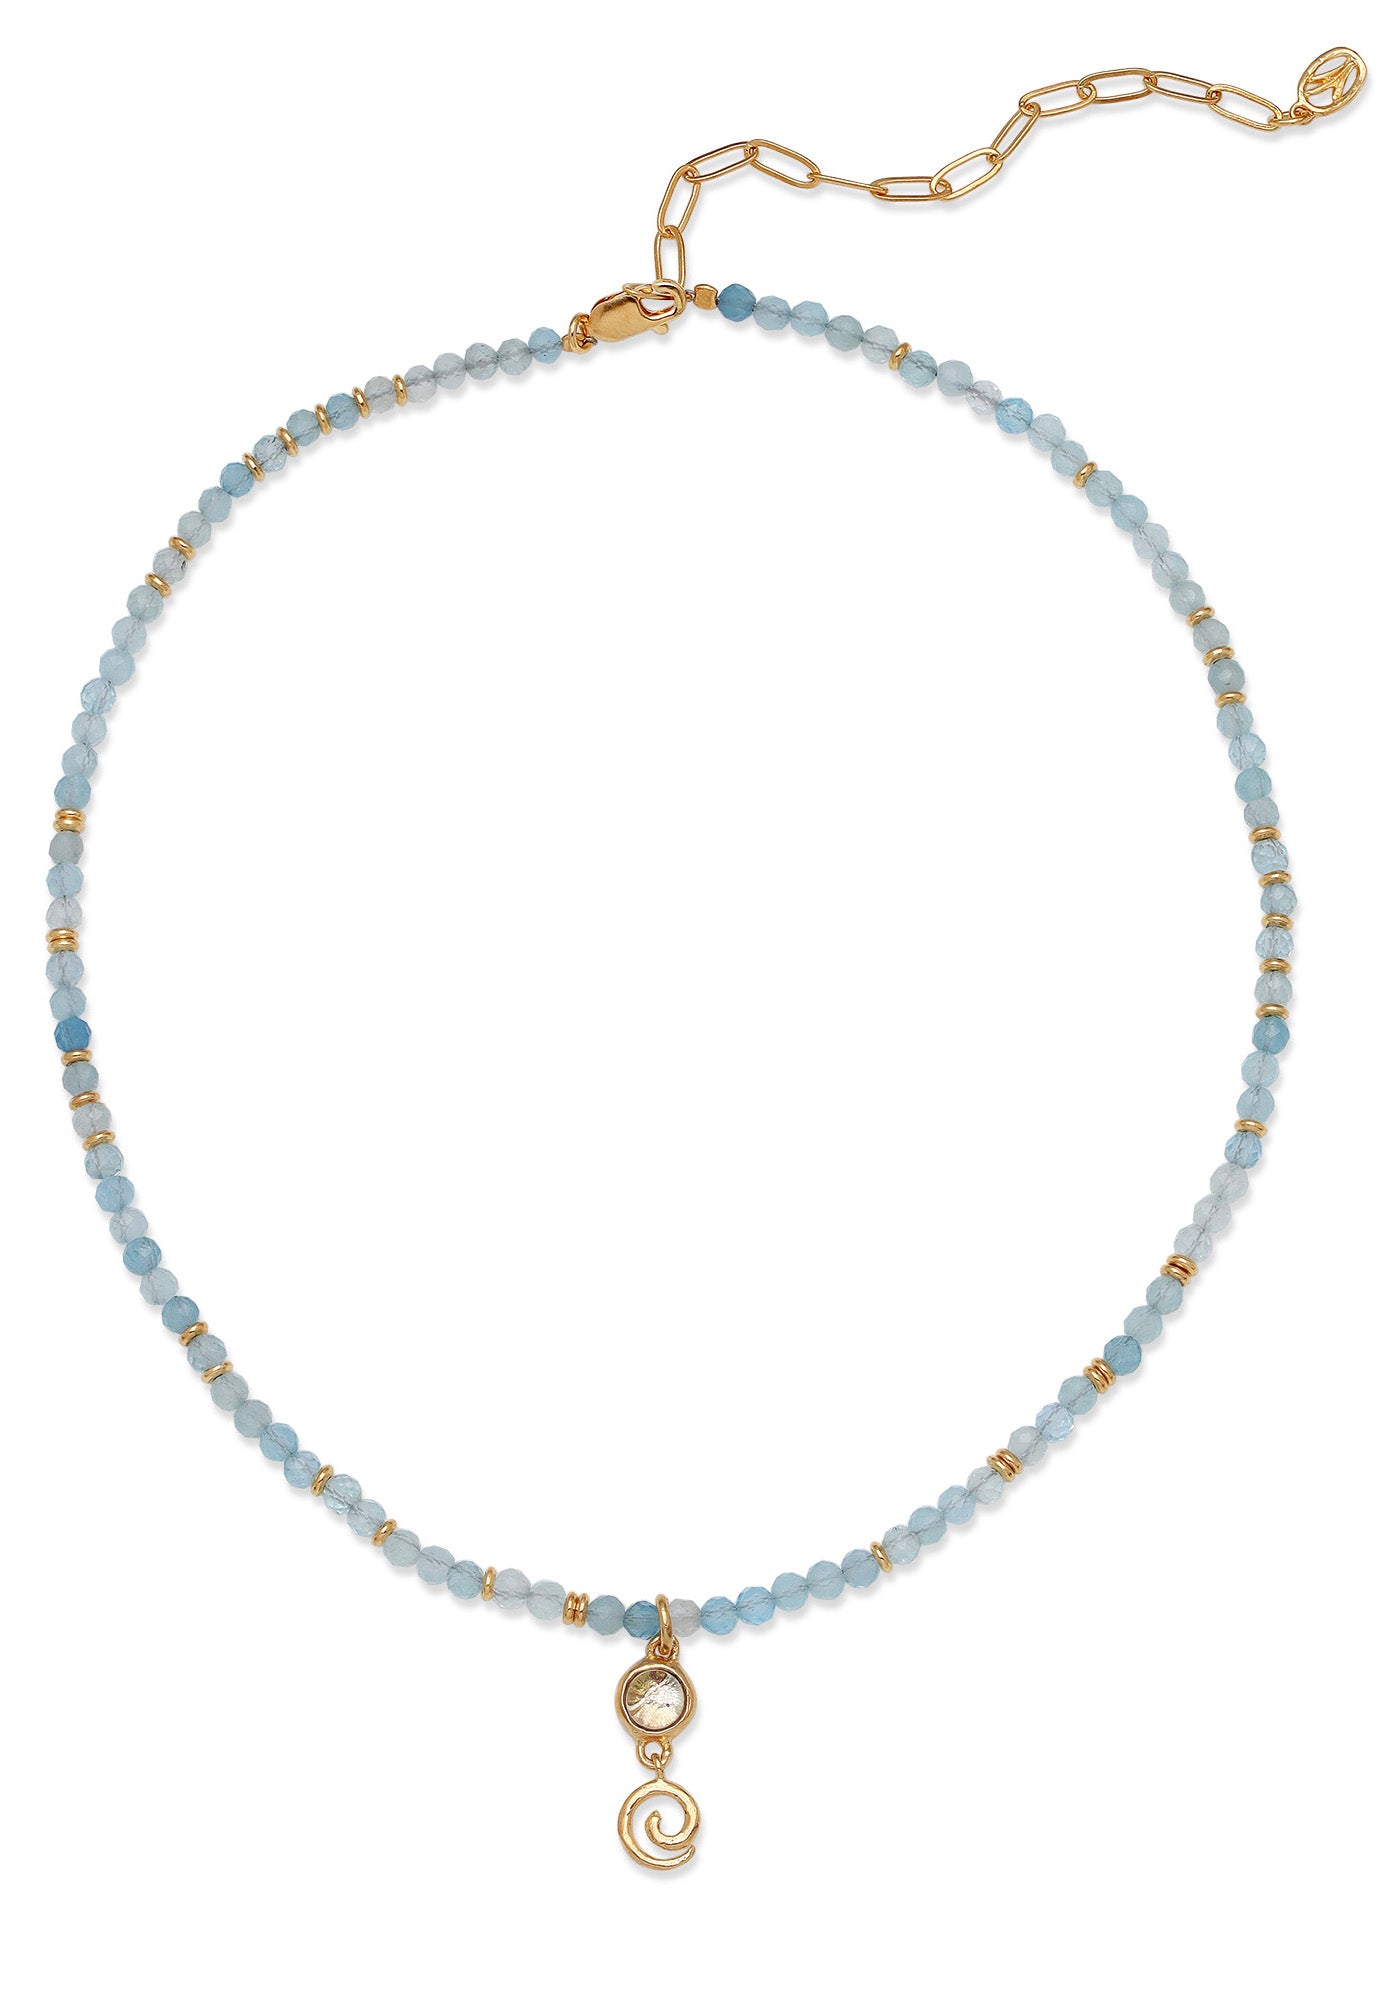 Blue Topaz and Aqua Marine Air Element Beaded Necklace and Pendant